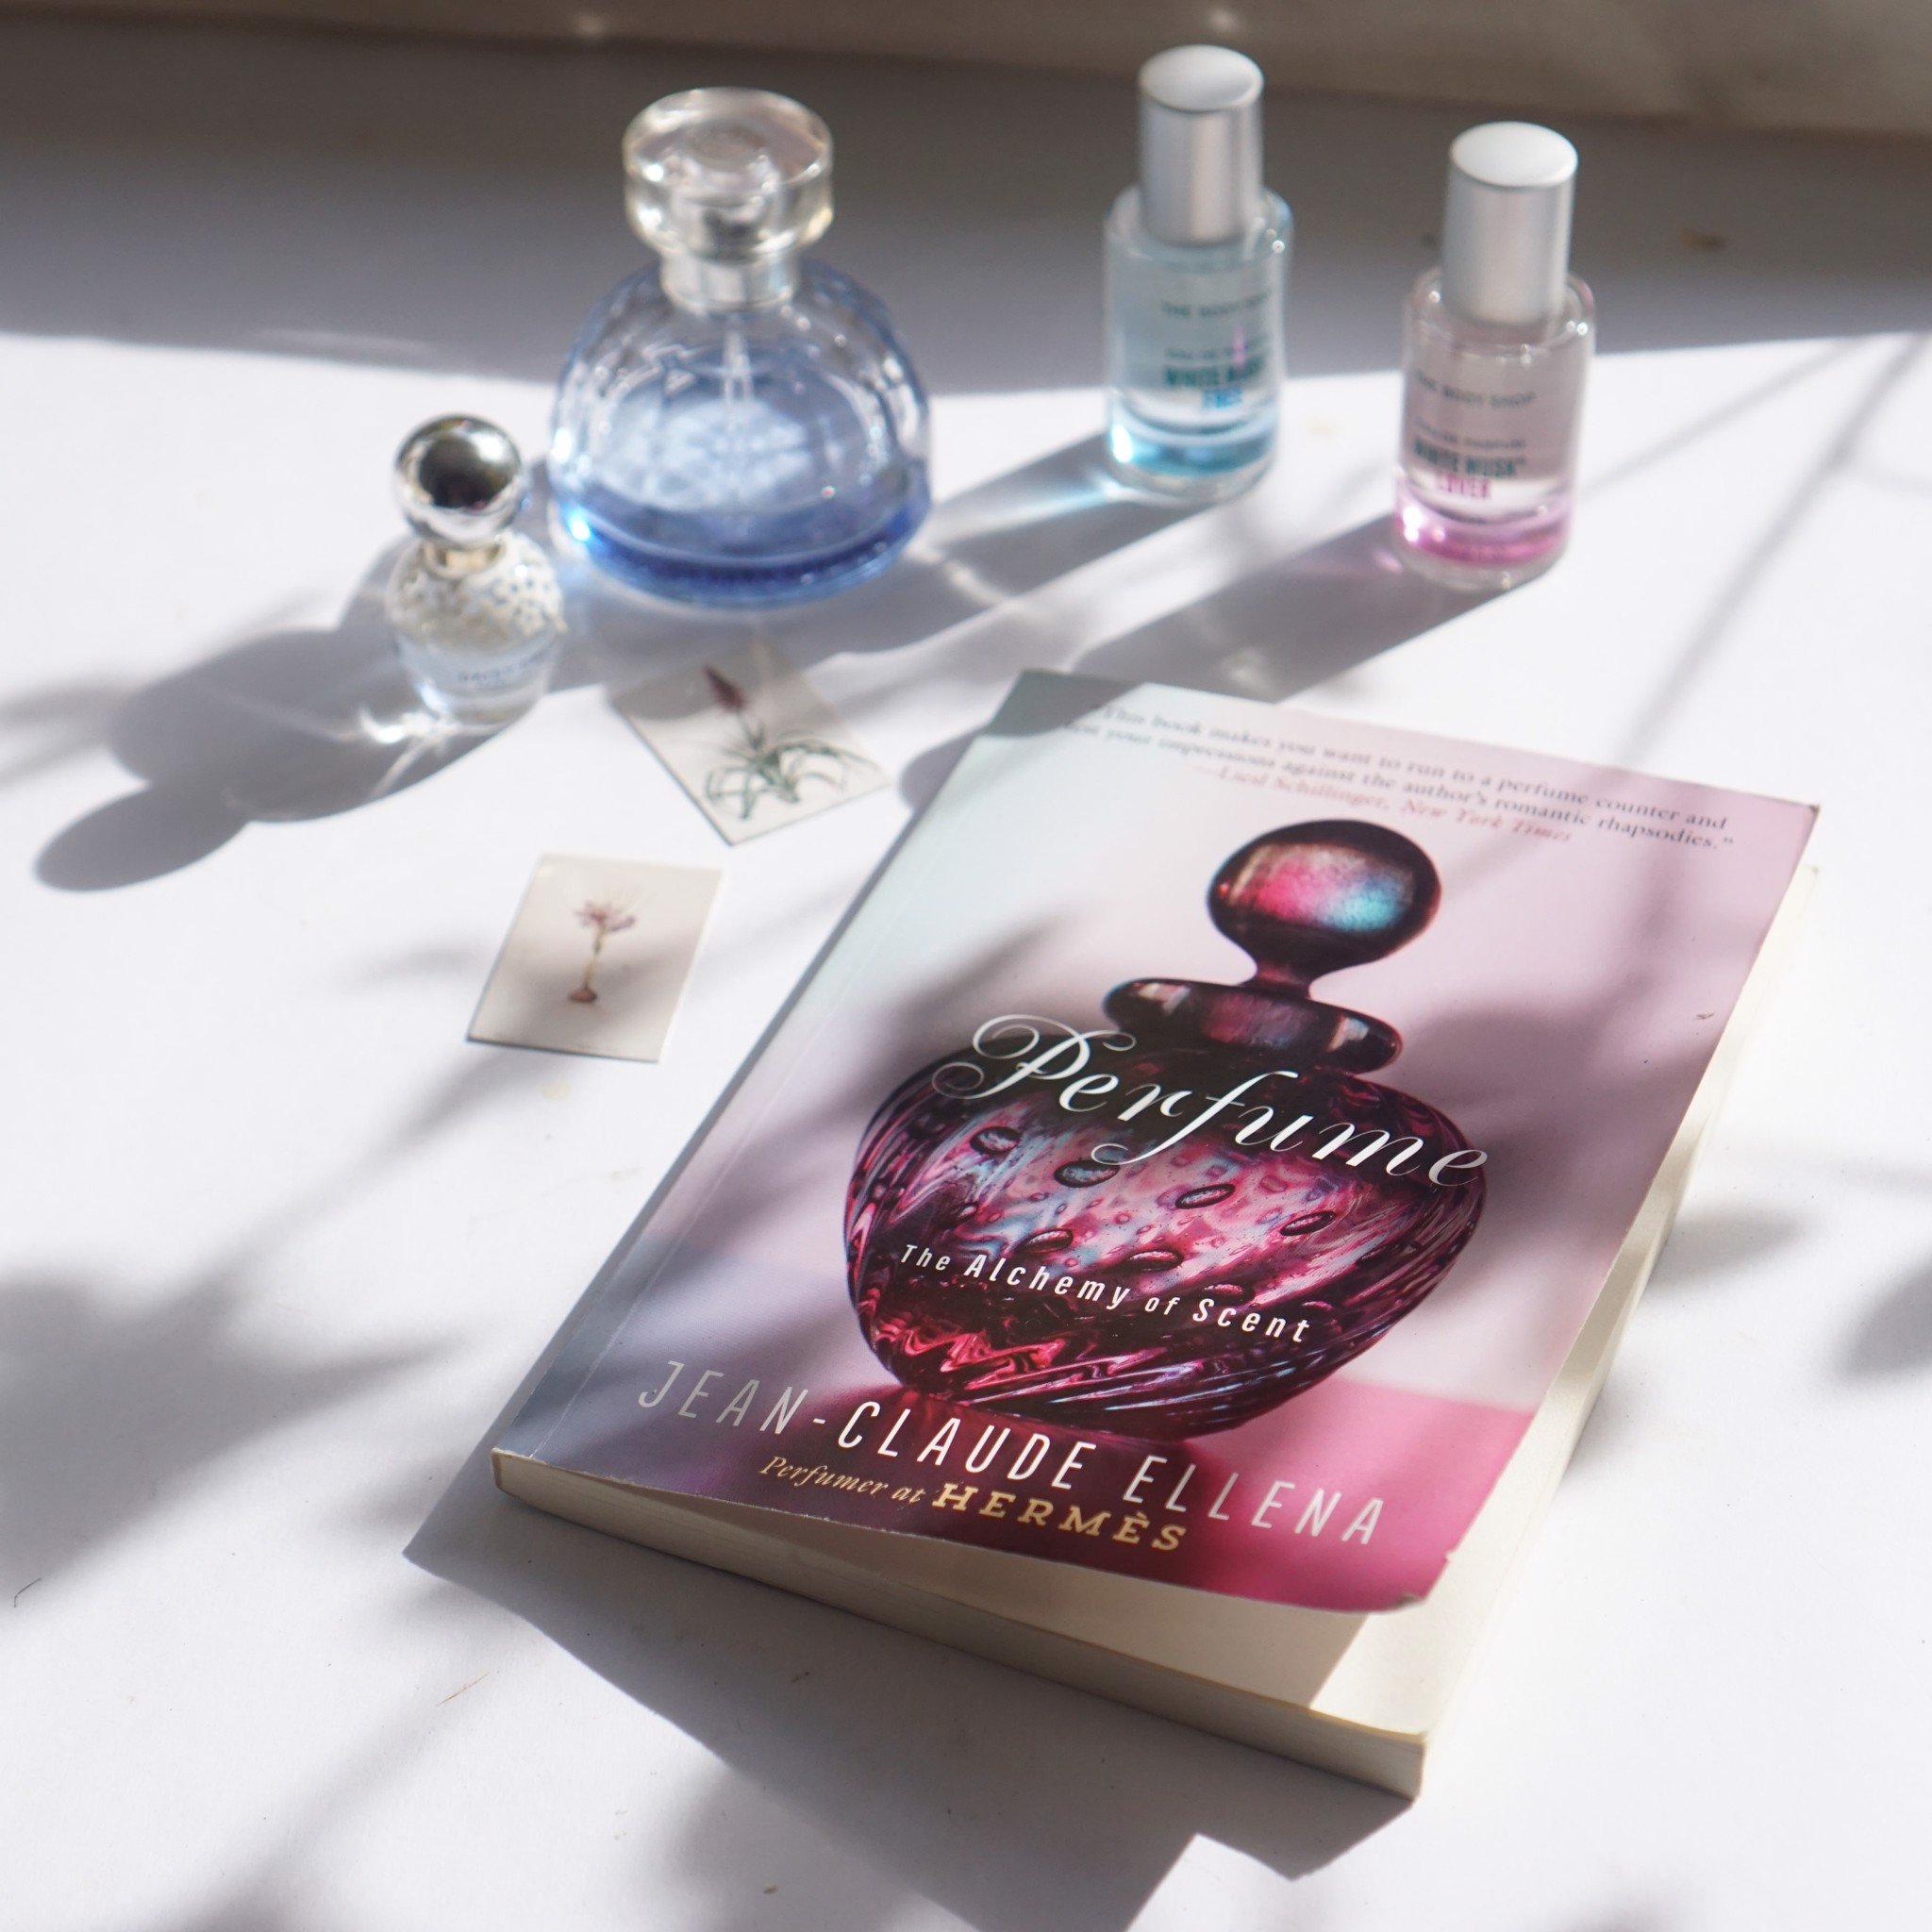 [PART 2] BOOK REVIEW: The Alchemy of Scent by Jean Claude Ellena